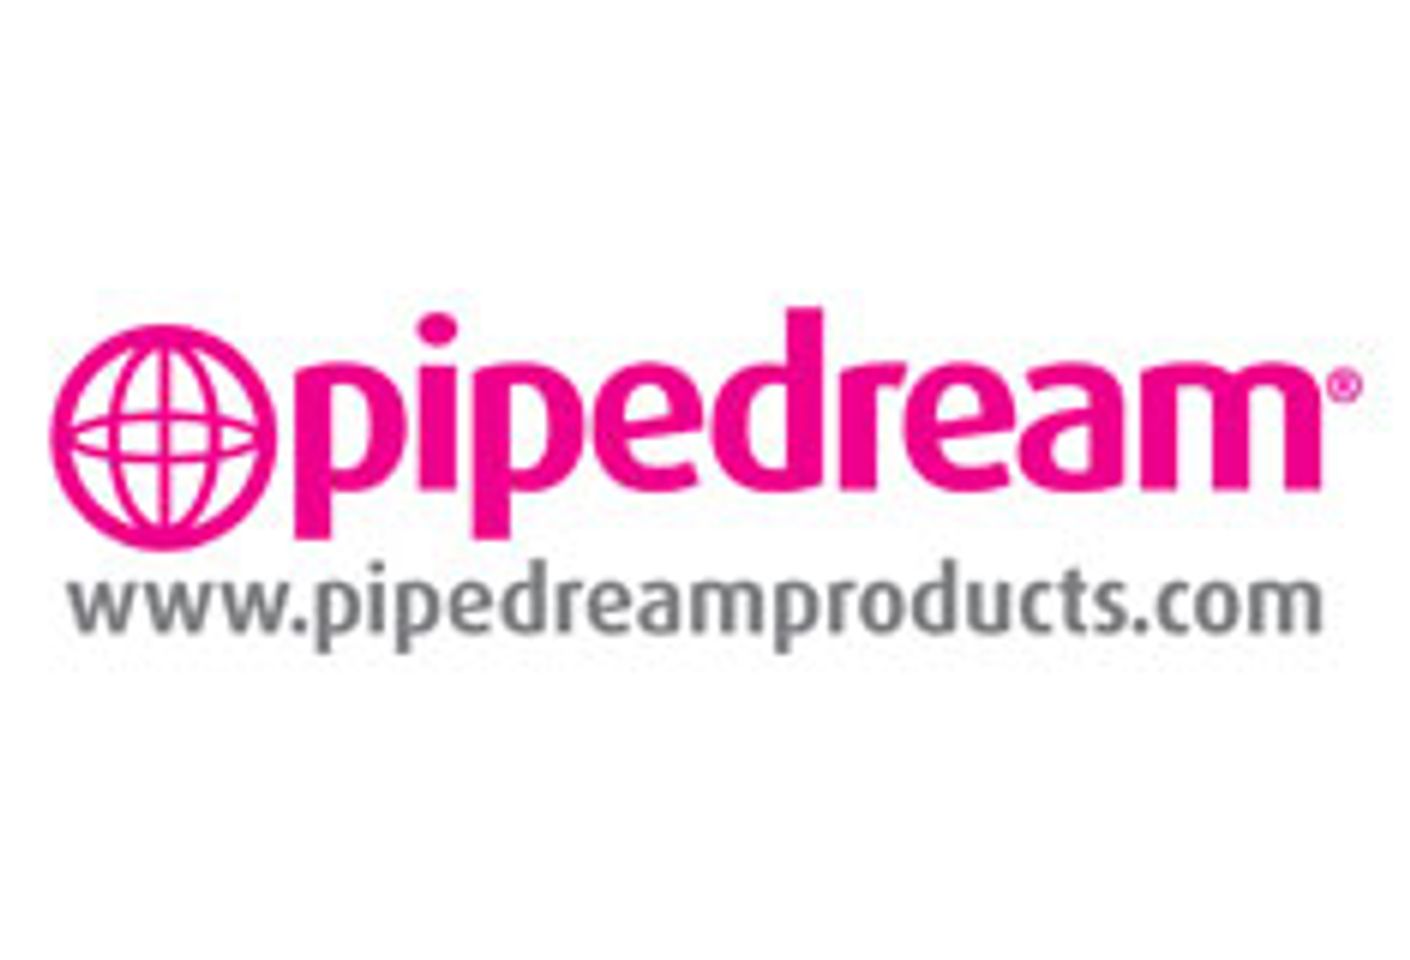 Pipedream Reports Successful Trip To ECN/IVD Warehouse Show